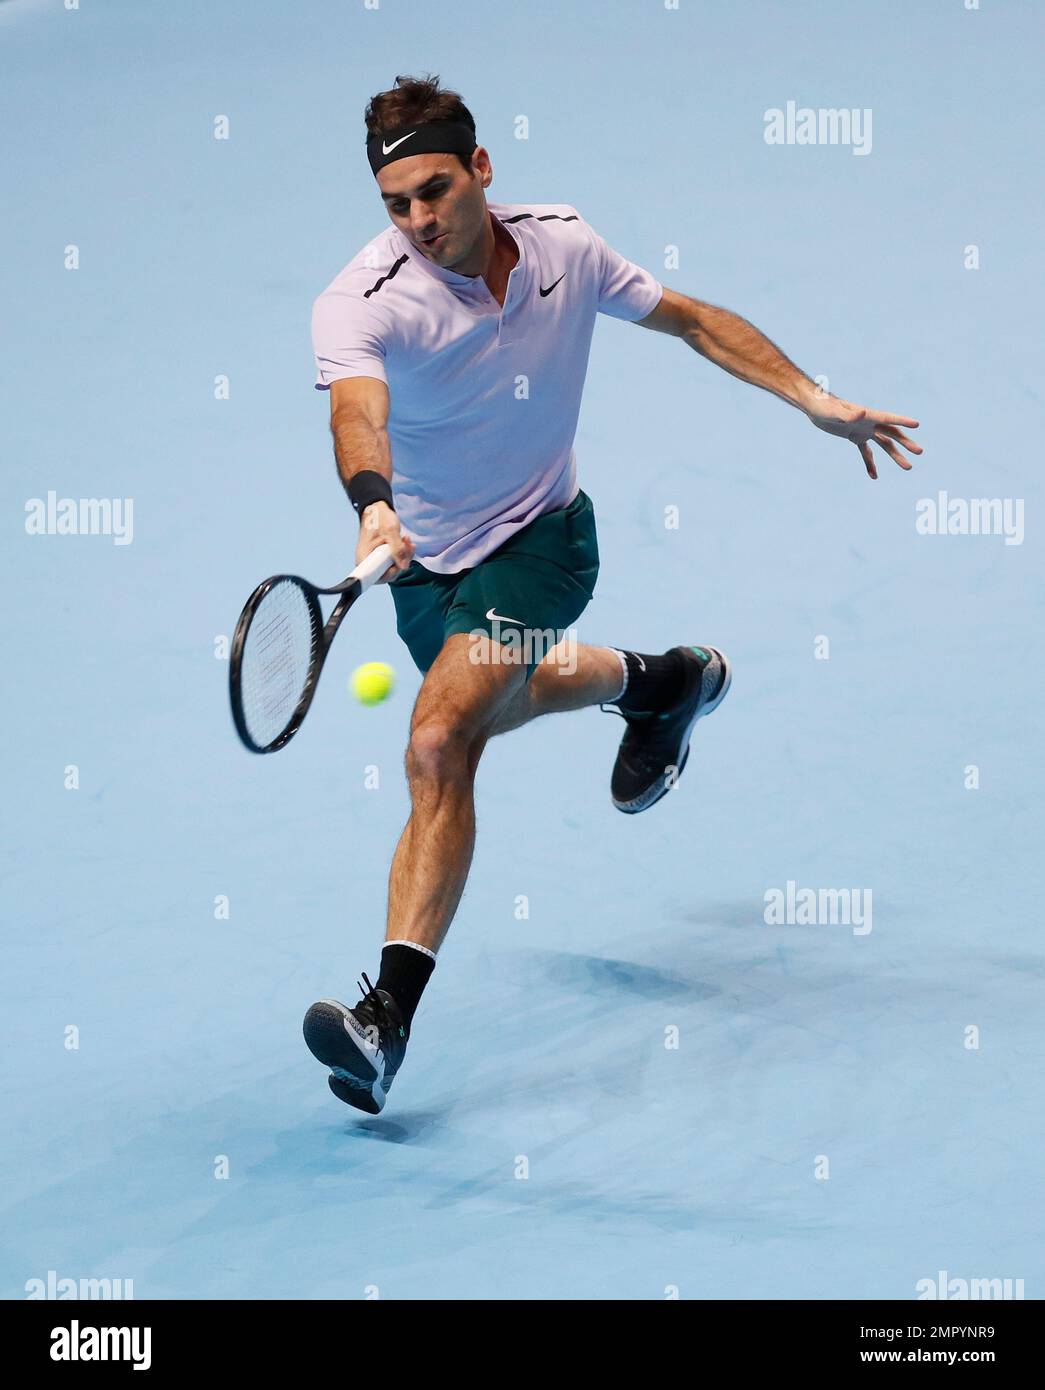 Roger Federer of Switzerland plays a return to Jack Sock of the United  States during their singles tennis match at the ATP World Finals at the O2  Arena in London, Sunday, Nov.